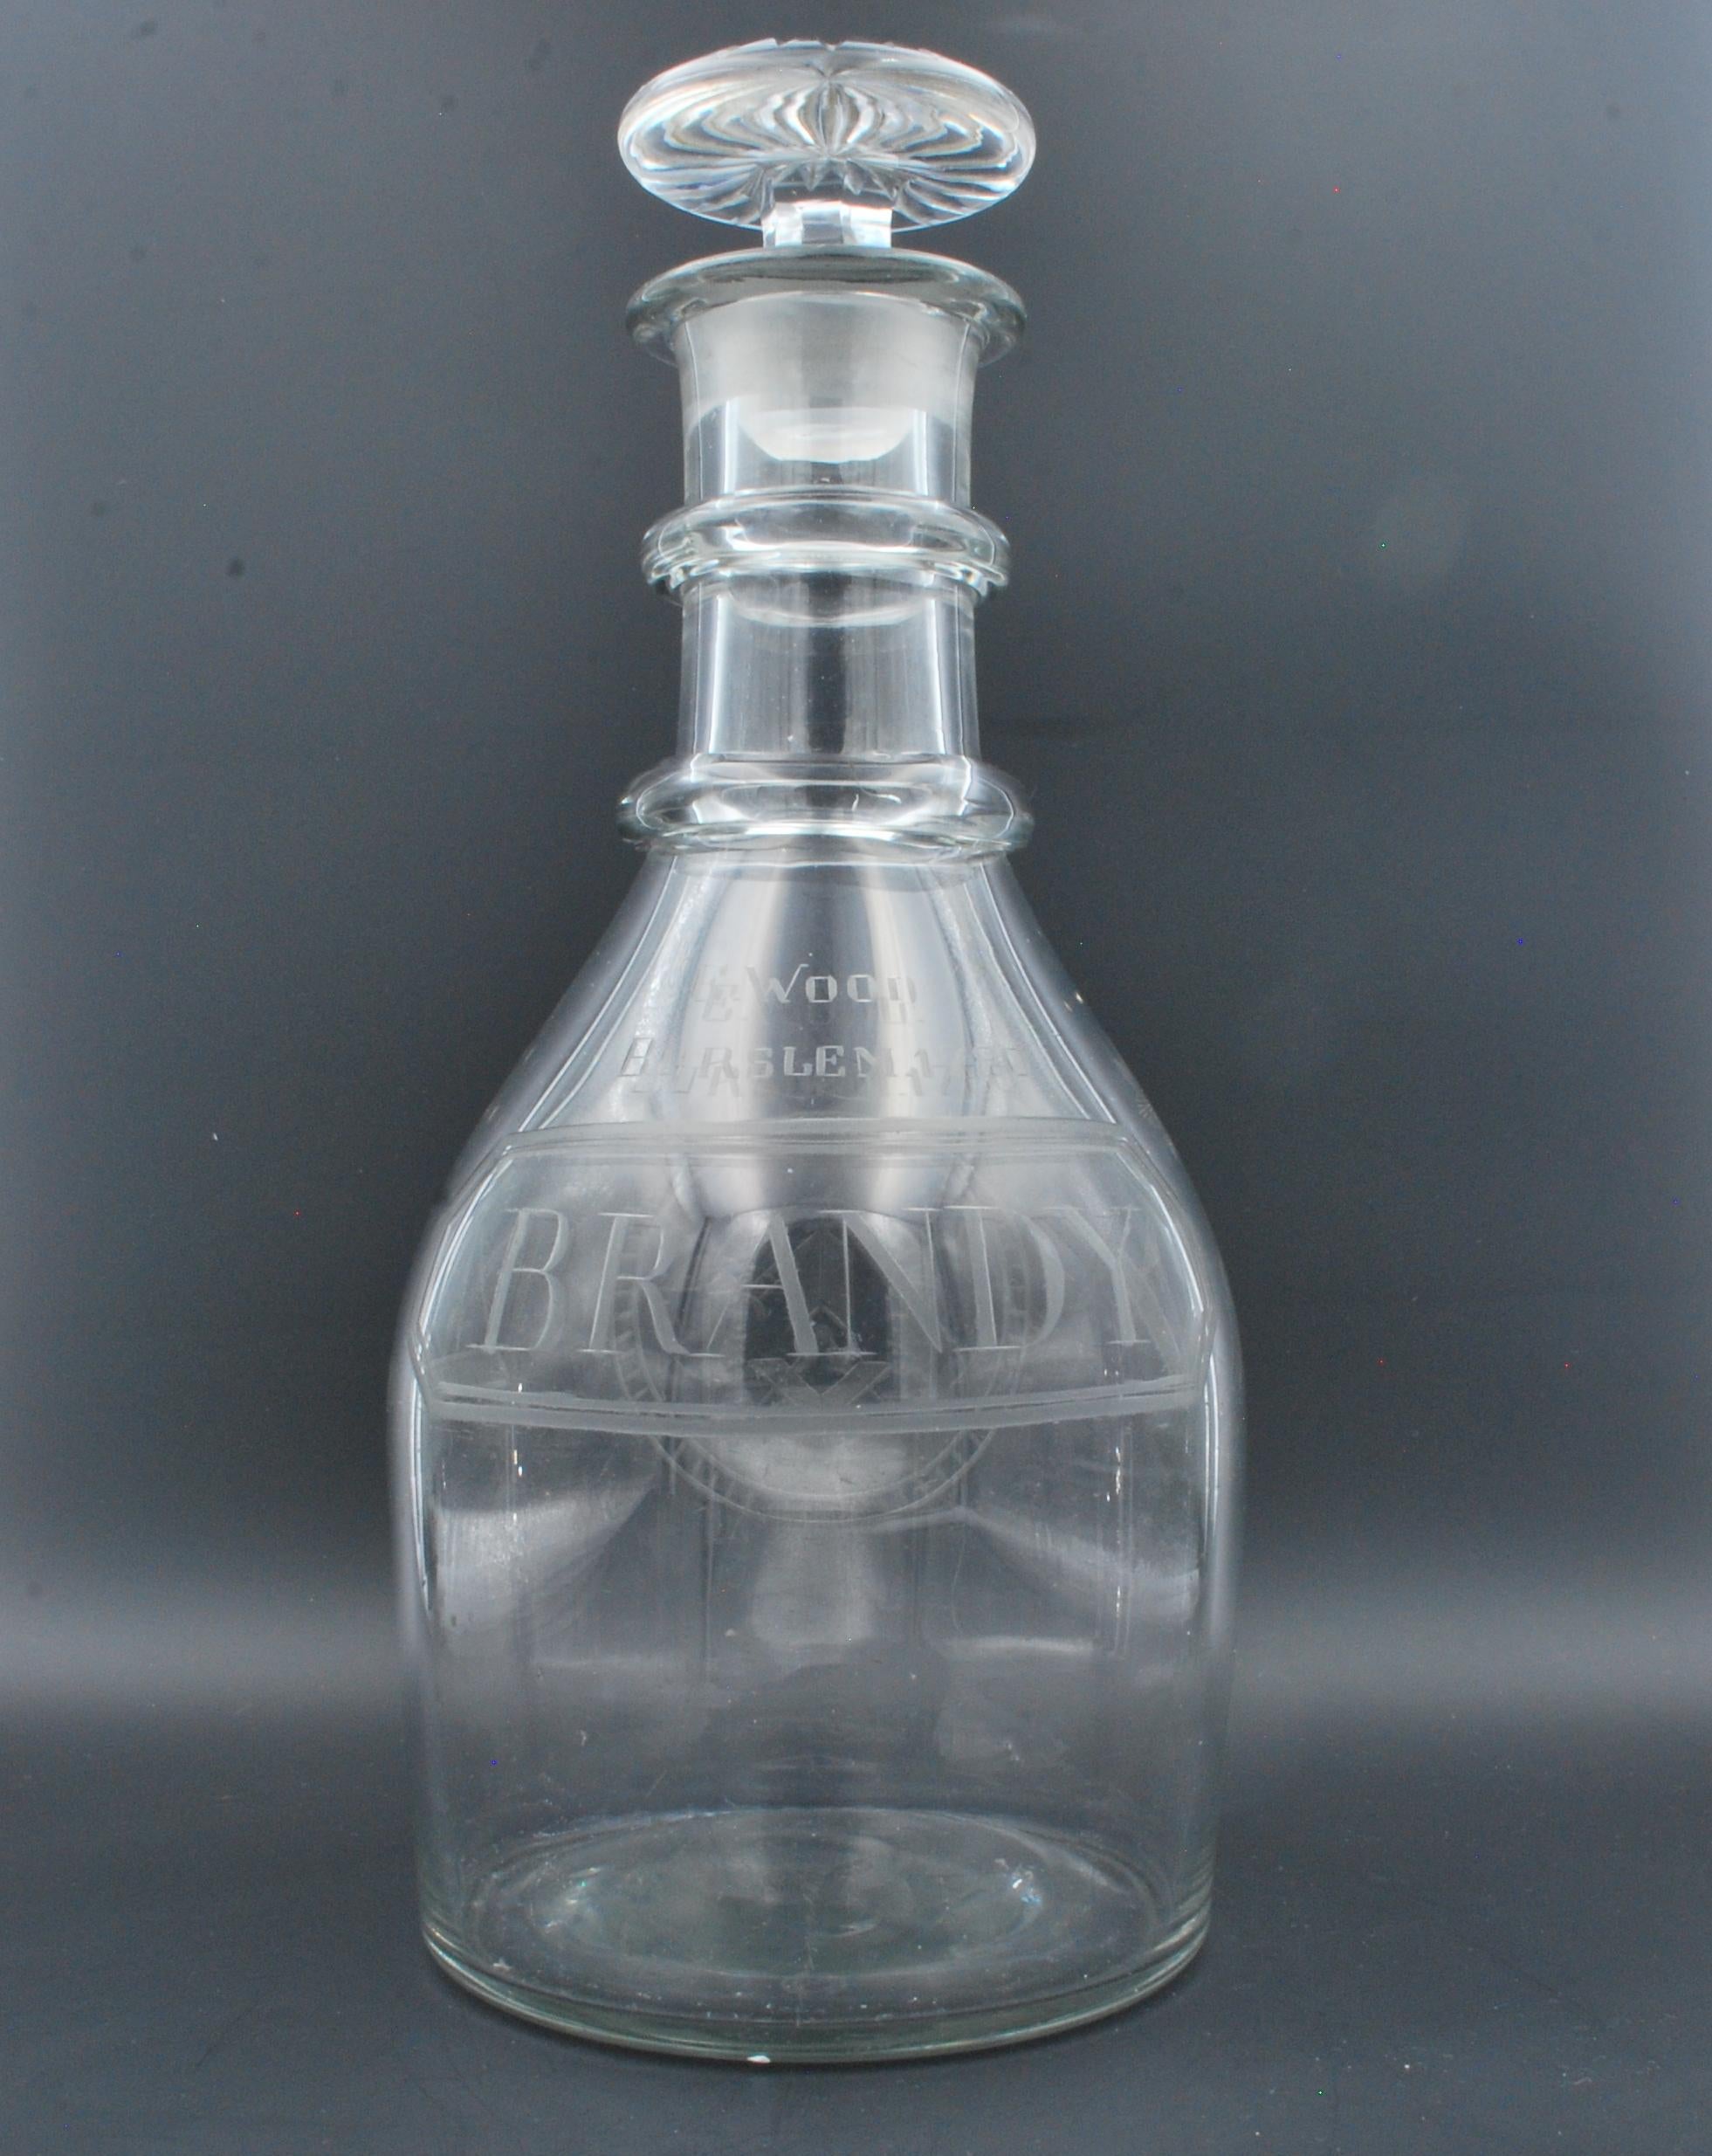 A magnum decanter, made plain in Georgian times. Later etched for brandy, and decorated with Masonic symbols, in imitation of early wheel-cut engraving.

The engraving includes the name of E Woods, Burslem, one of the famous potters of that